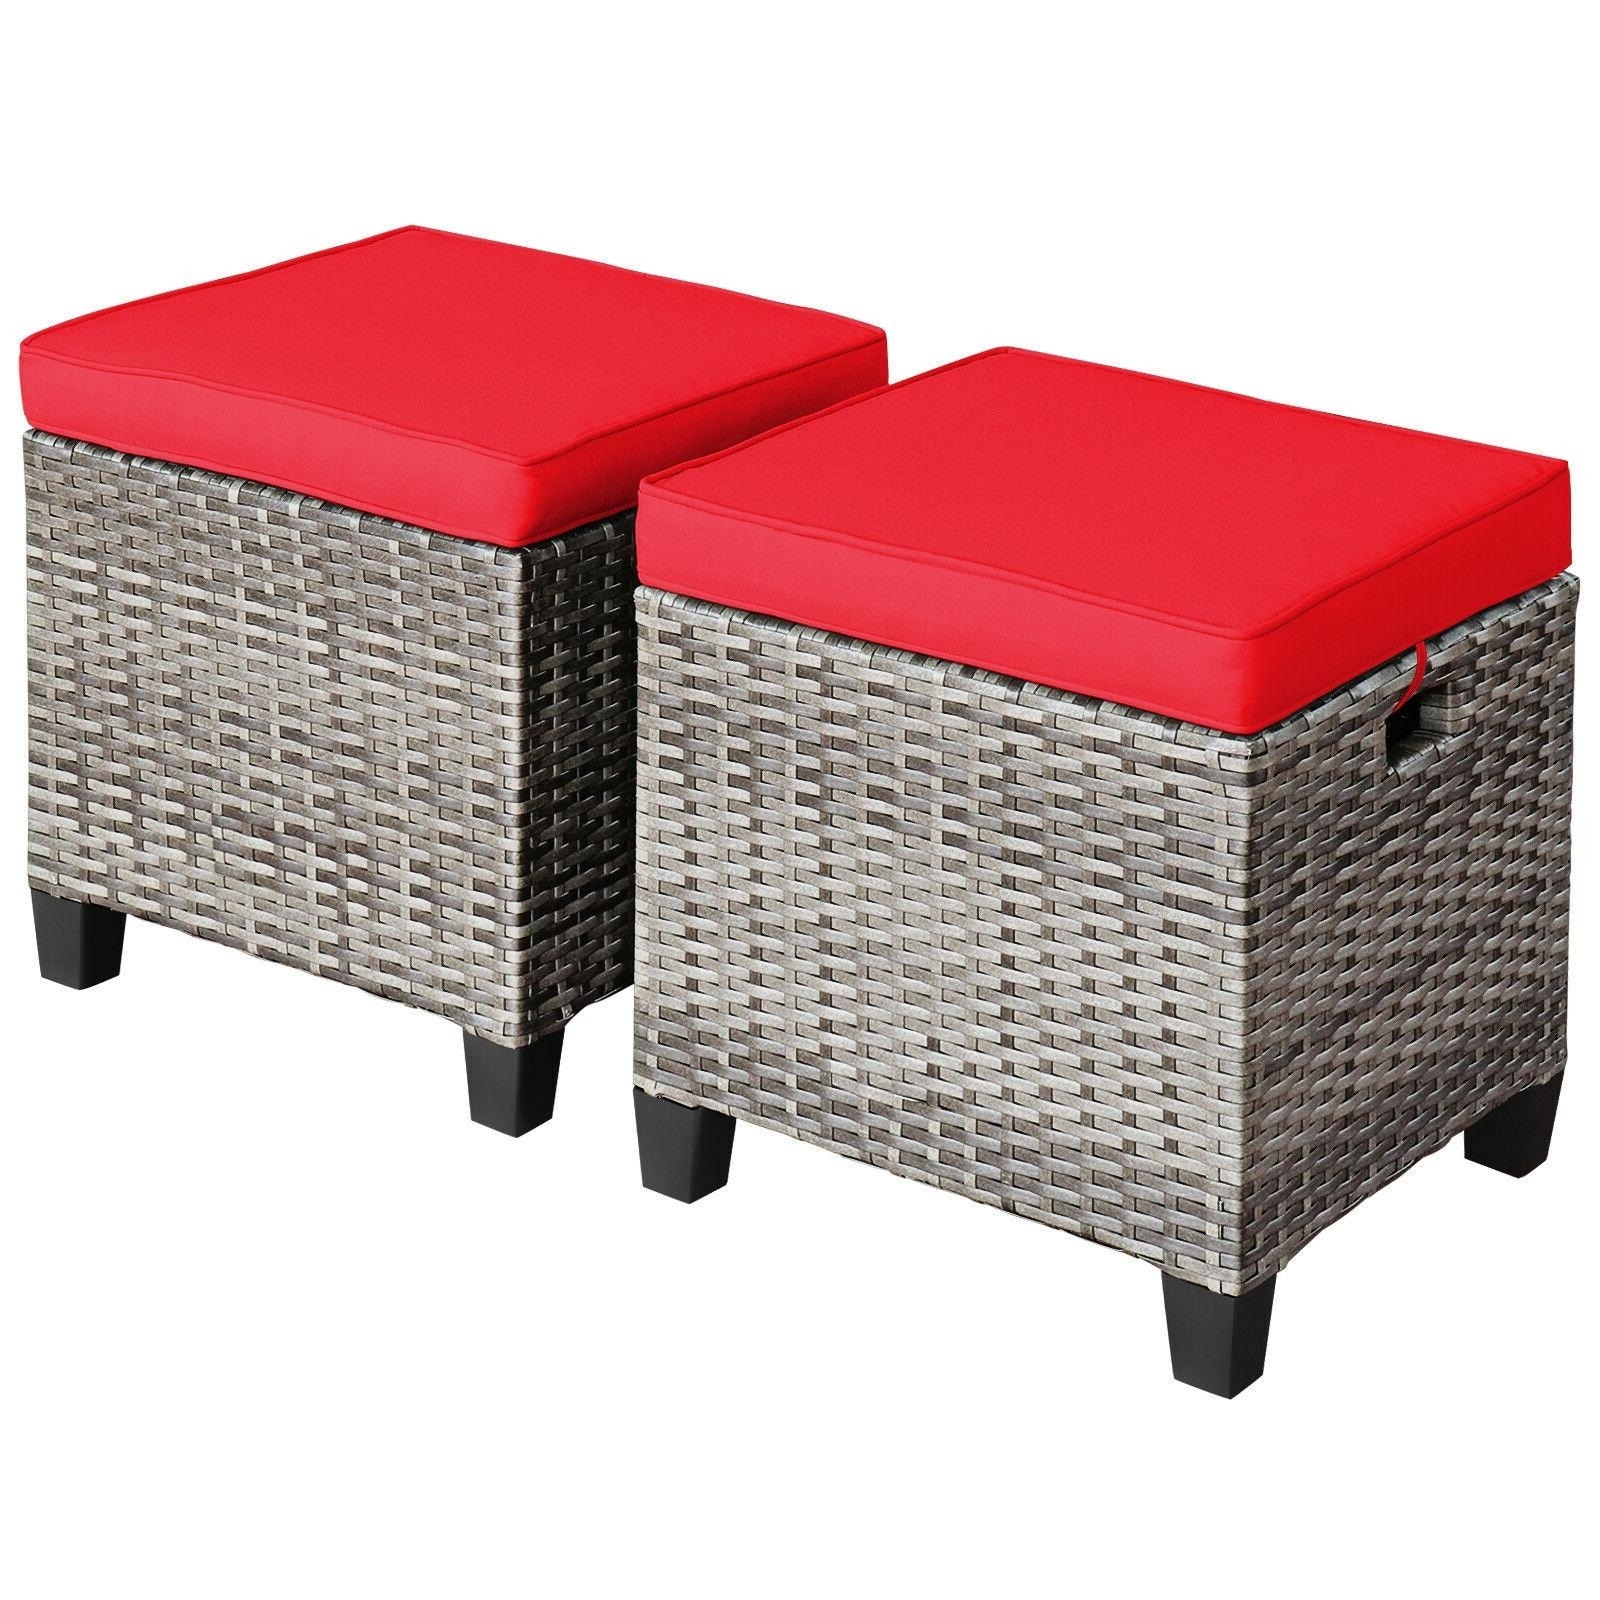 Happygrill 2 Pieces Patio Ottoman Set Outdoor Rattan Wicker Ottoman Seat with Removable Cushions Patio Furniture Footstool Footrest Seat